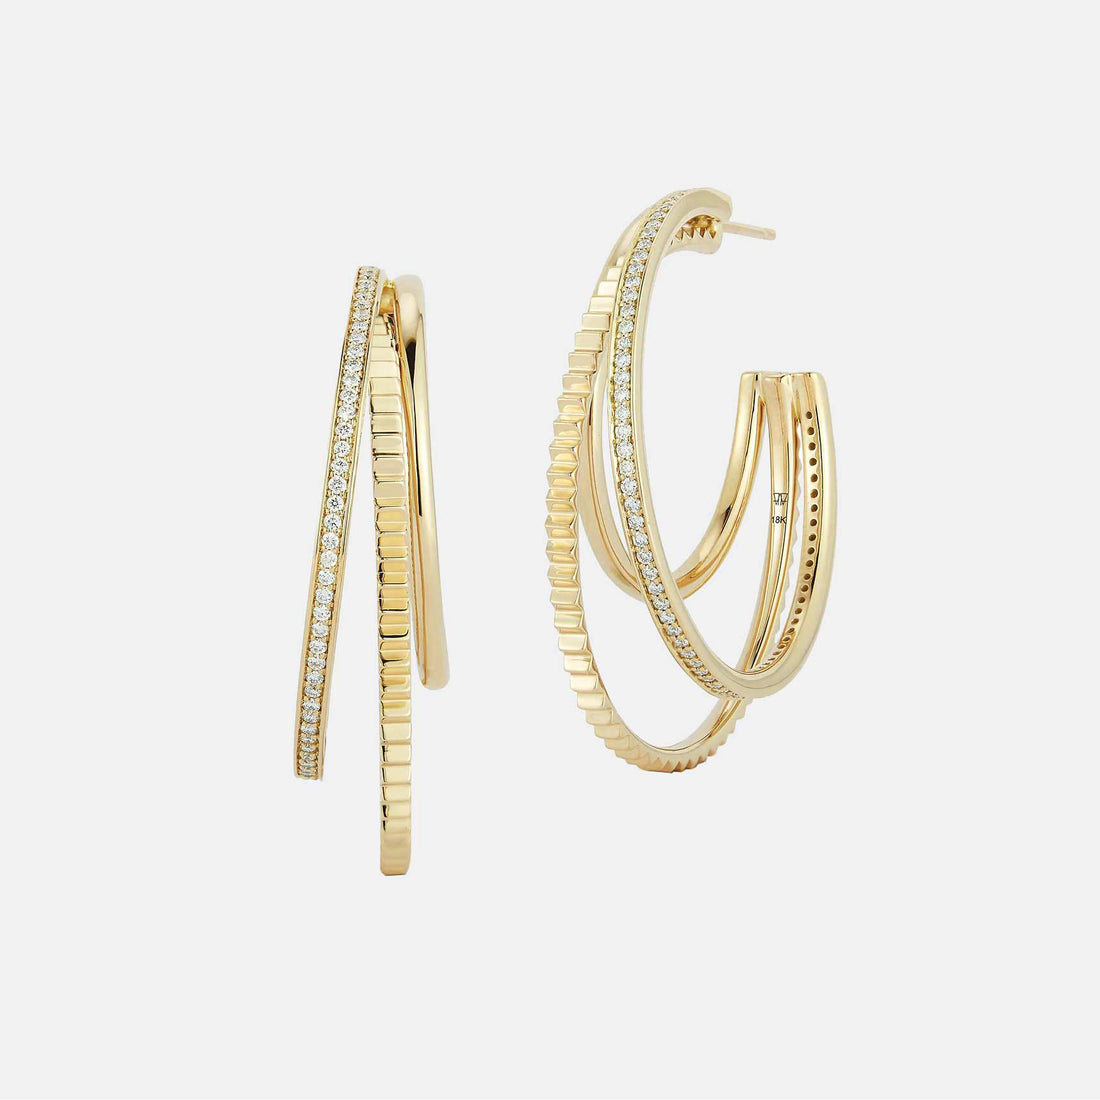 CLIVE 18K Yellow GOLD AND DIAMOND TRIPLE HOOP EARRINGS